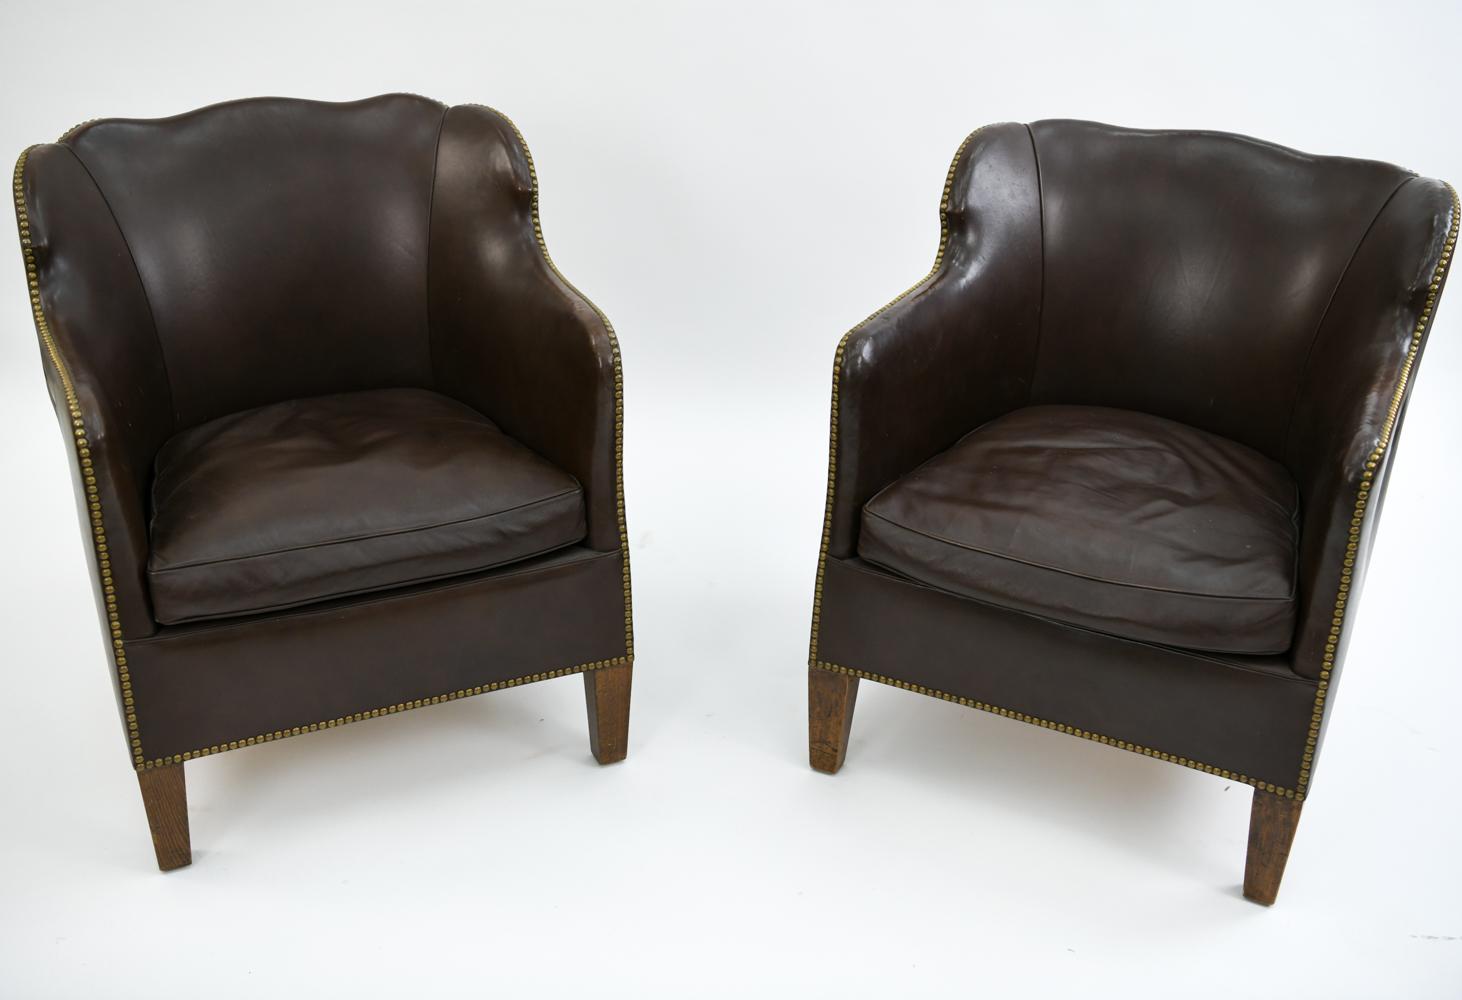 This is a handsome pair of Danish library chairs. Upholstered in leather, these chairs feature brass tacked edges and scalloped backrests. These chairs would be attractive in both modern or traditional interiors for their timeless appearance.